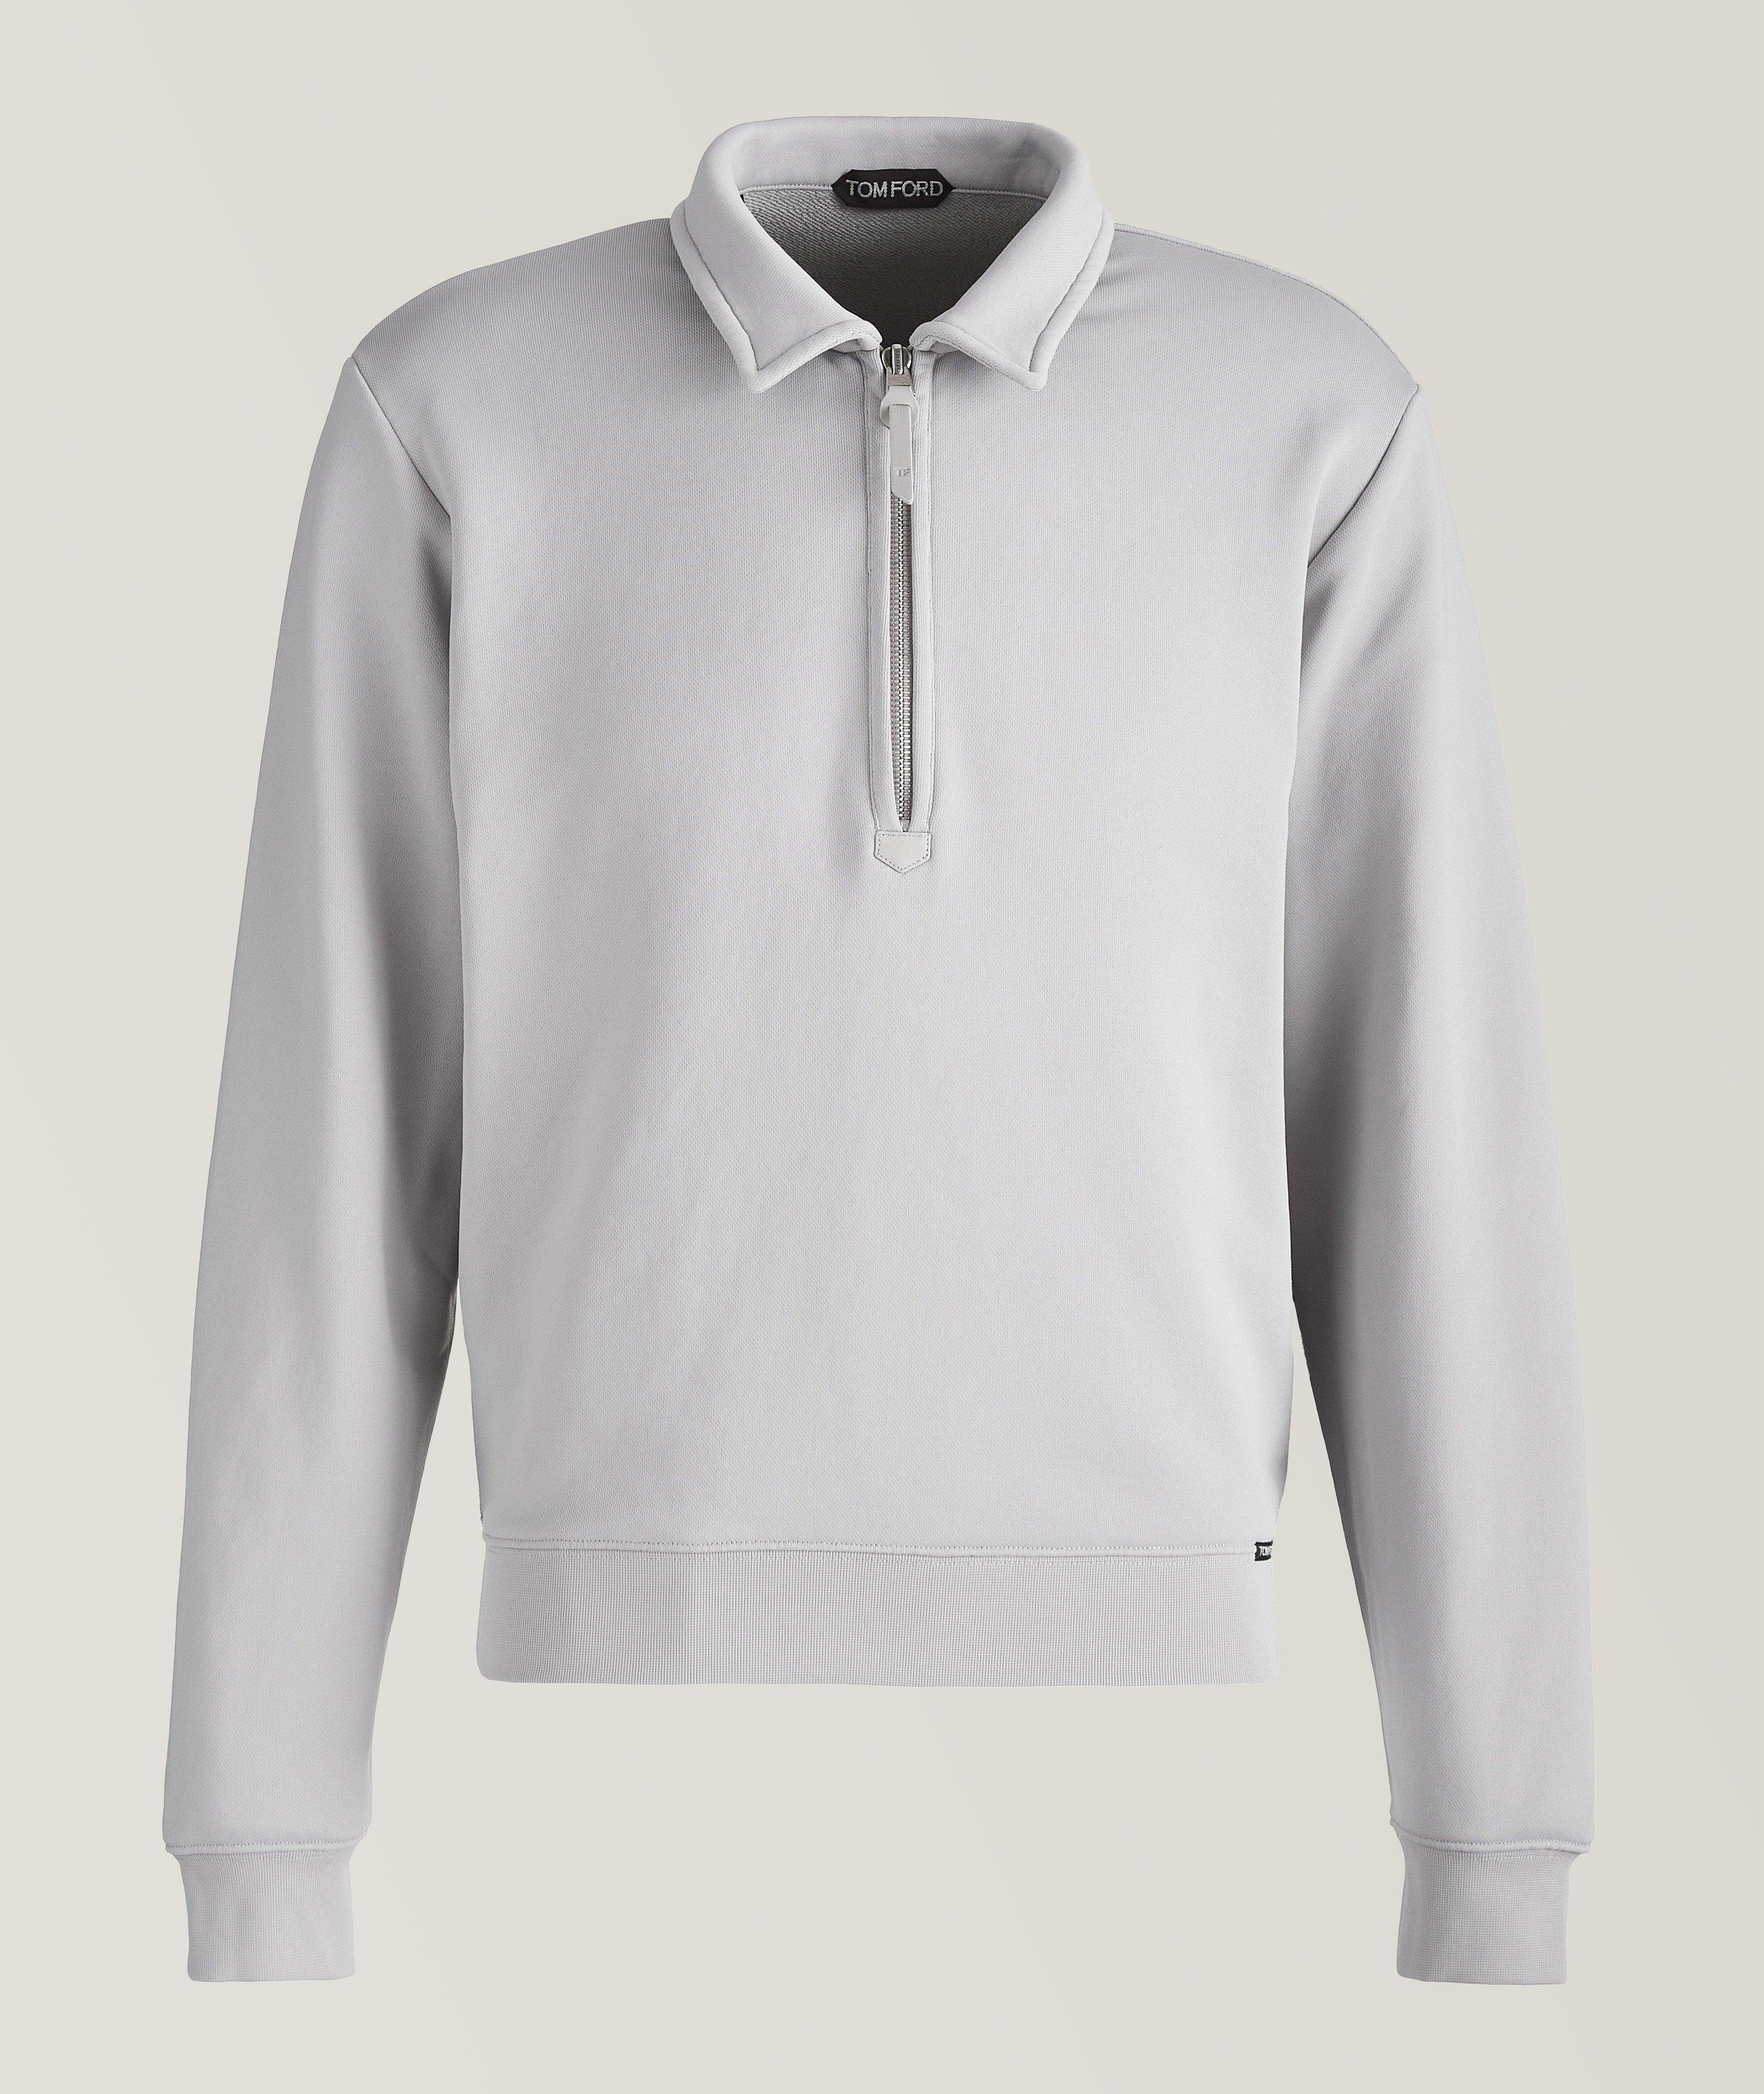 TOM FORD Long-Sleeve Half-Zip Cotton-Blend Polo